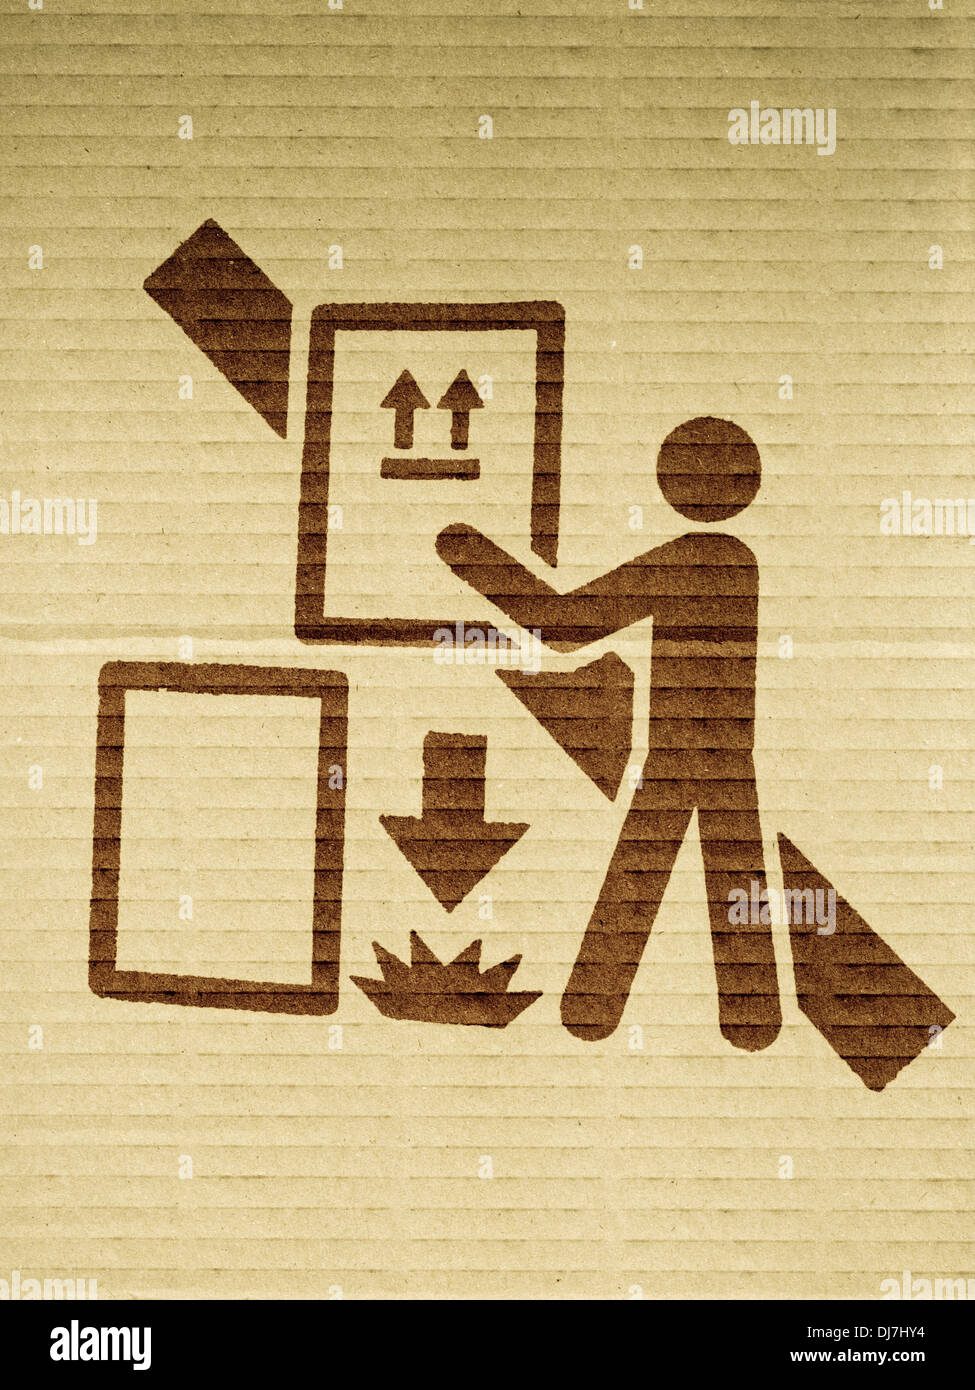 Sign of Do not Drop the product from stacking, on a packing box Stock Photo